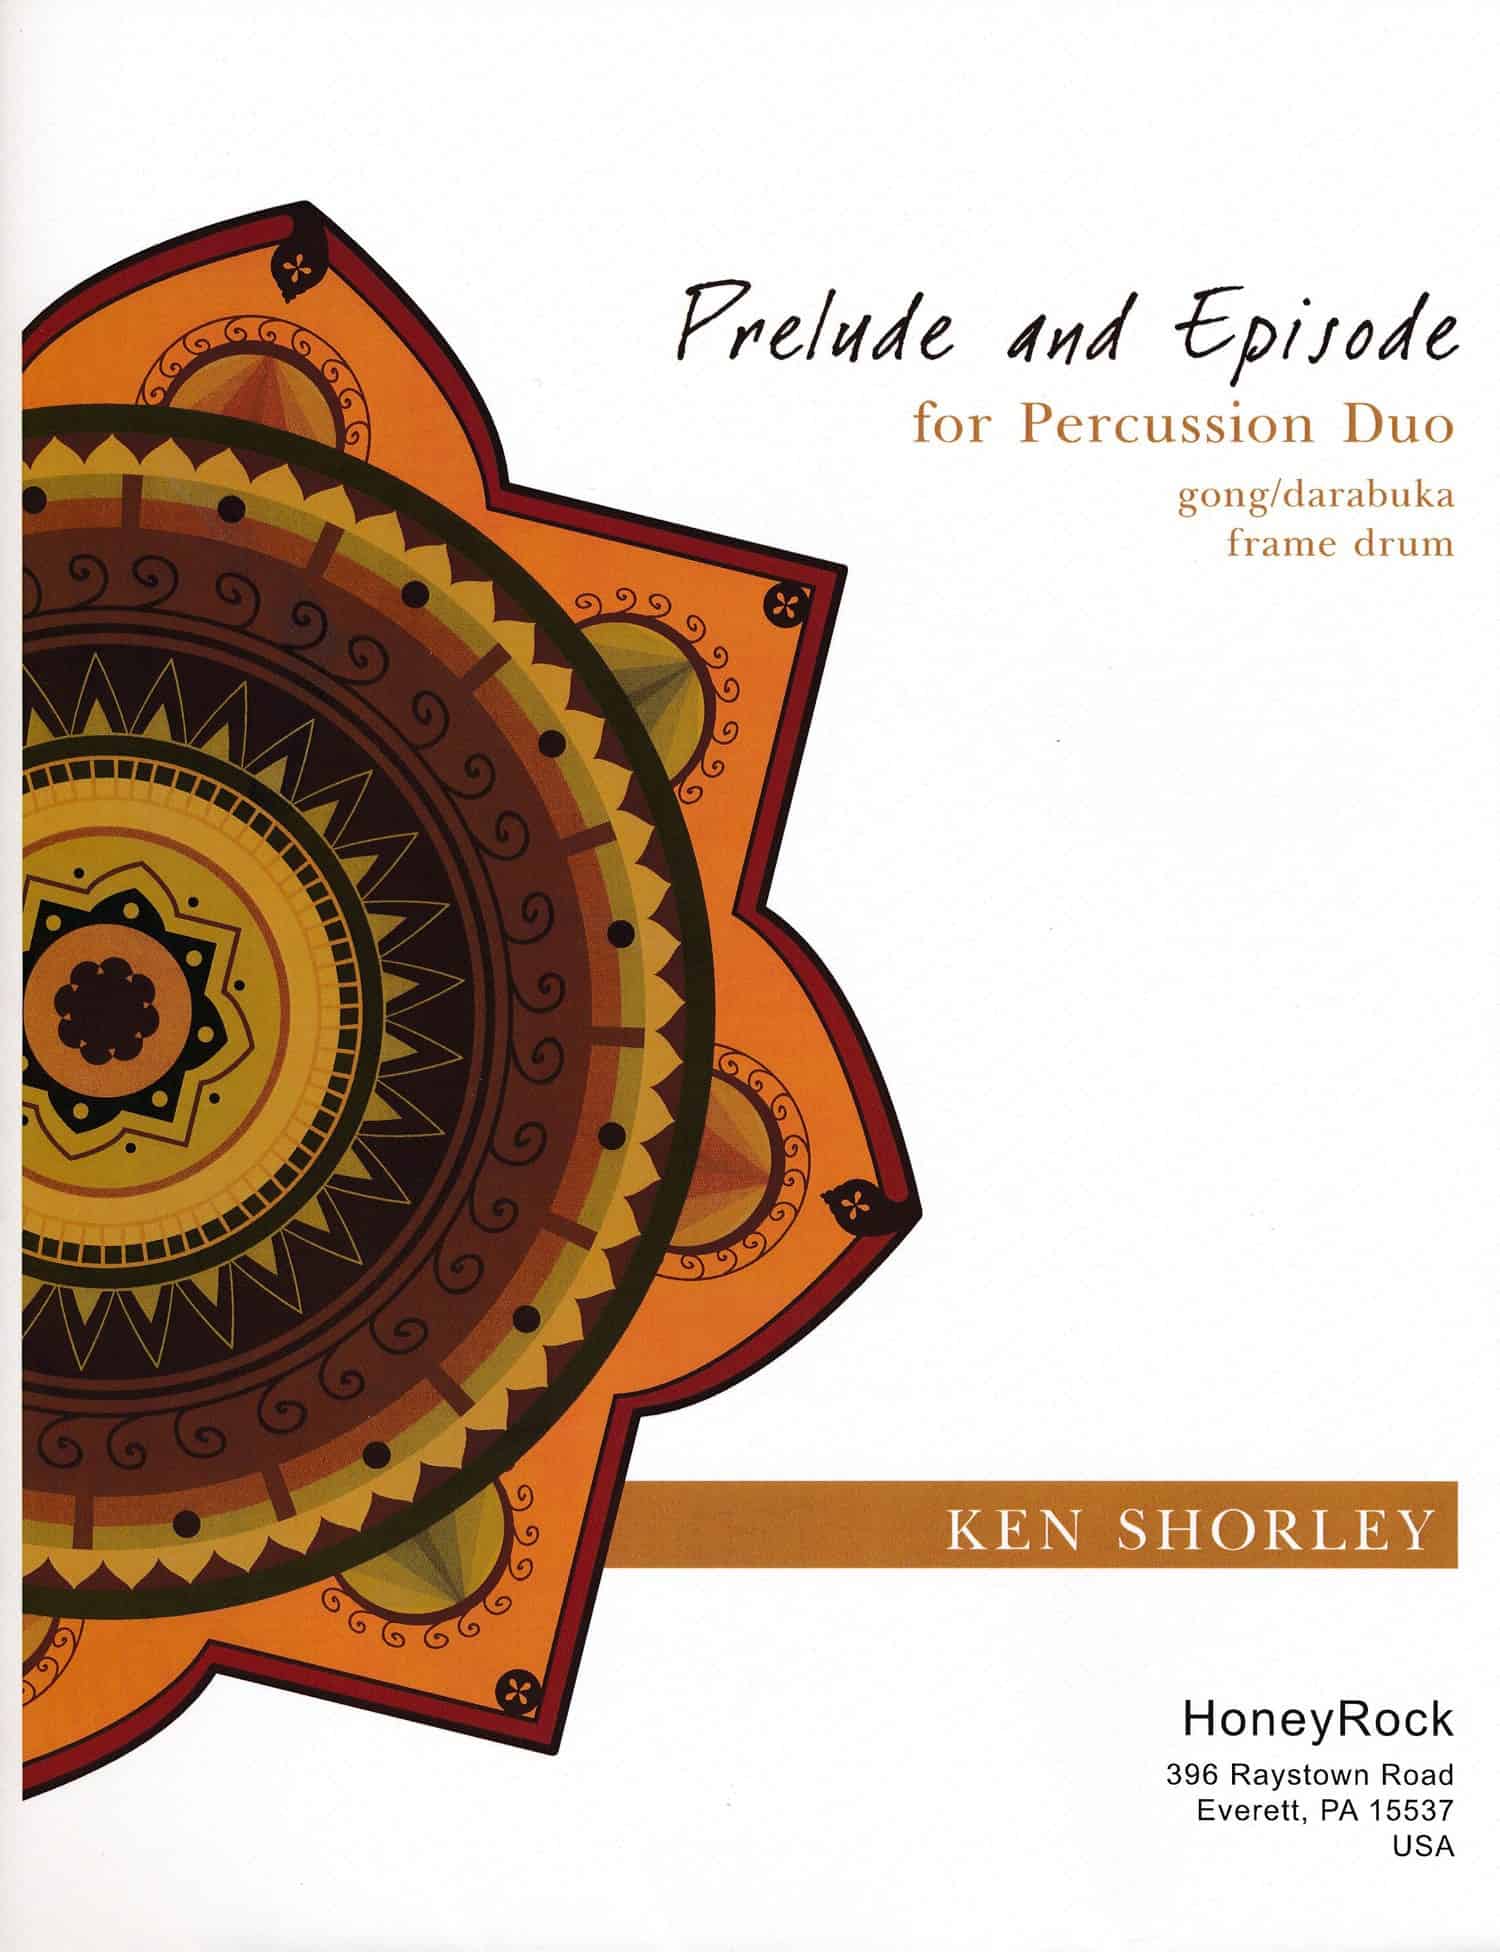 Prelude and Episode